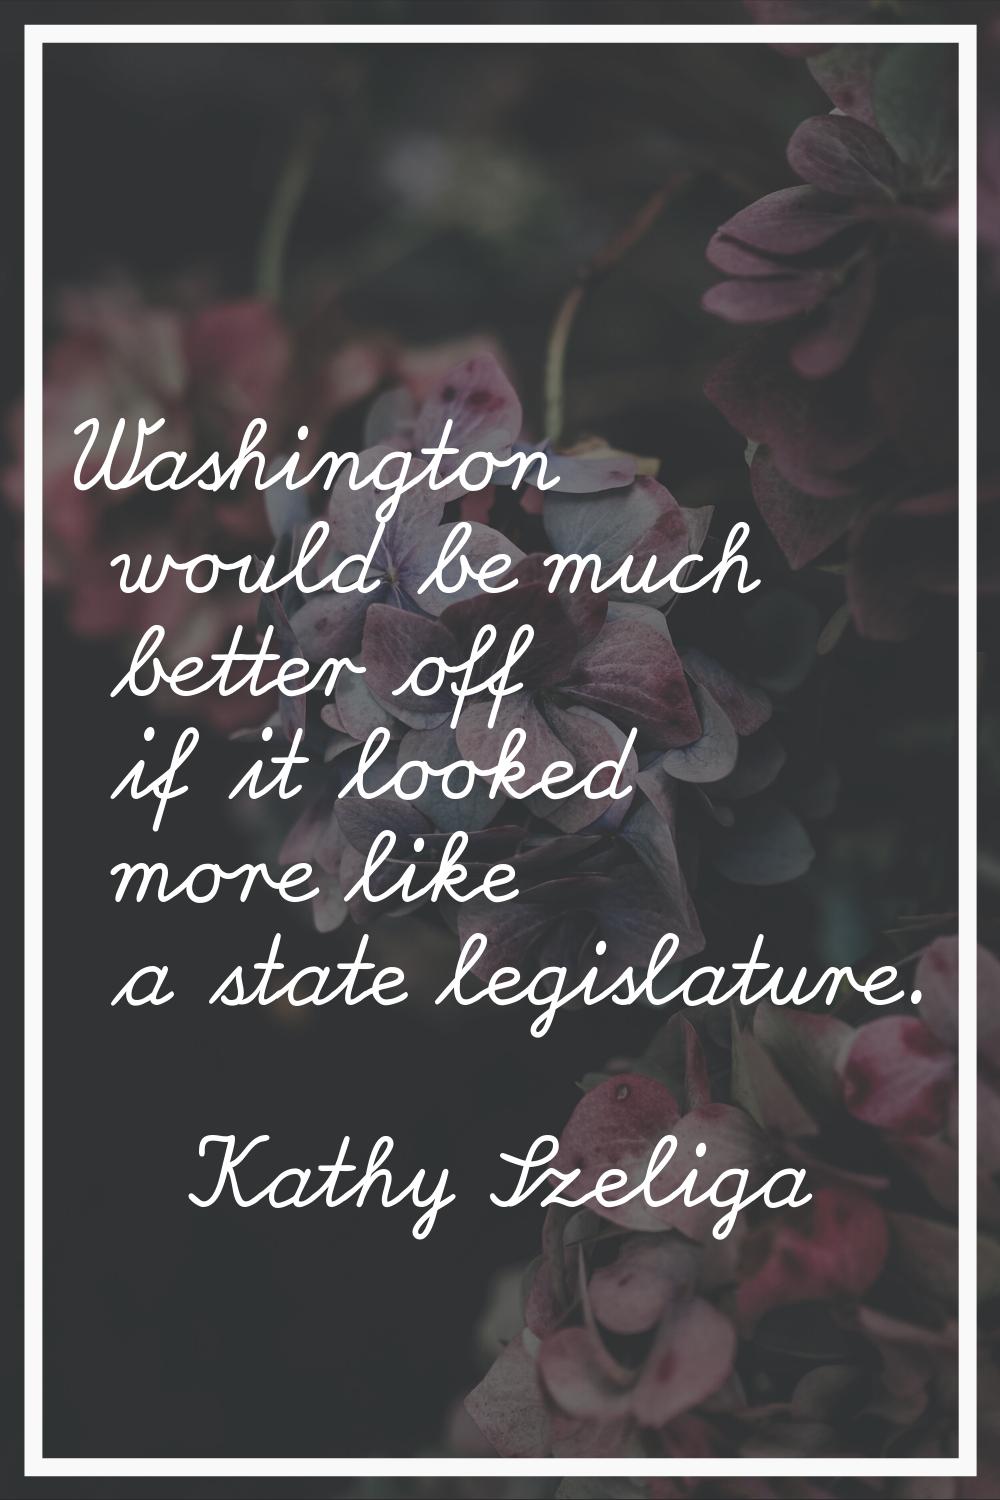 Washington would be much better off if it looked more like a state legislature.